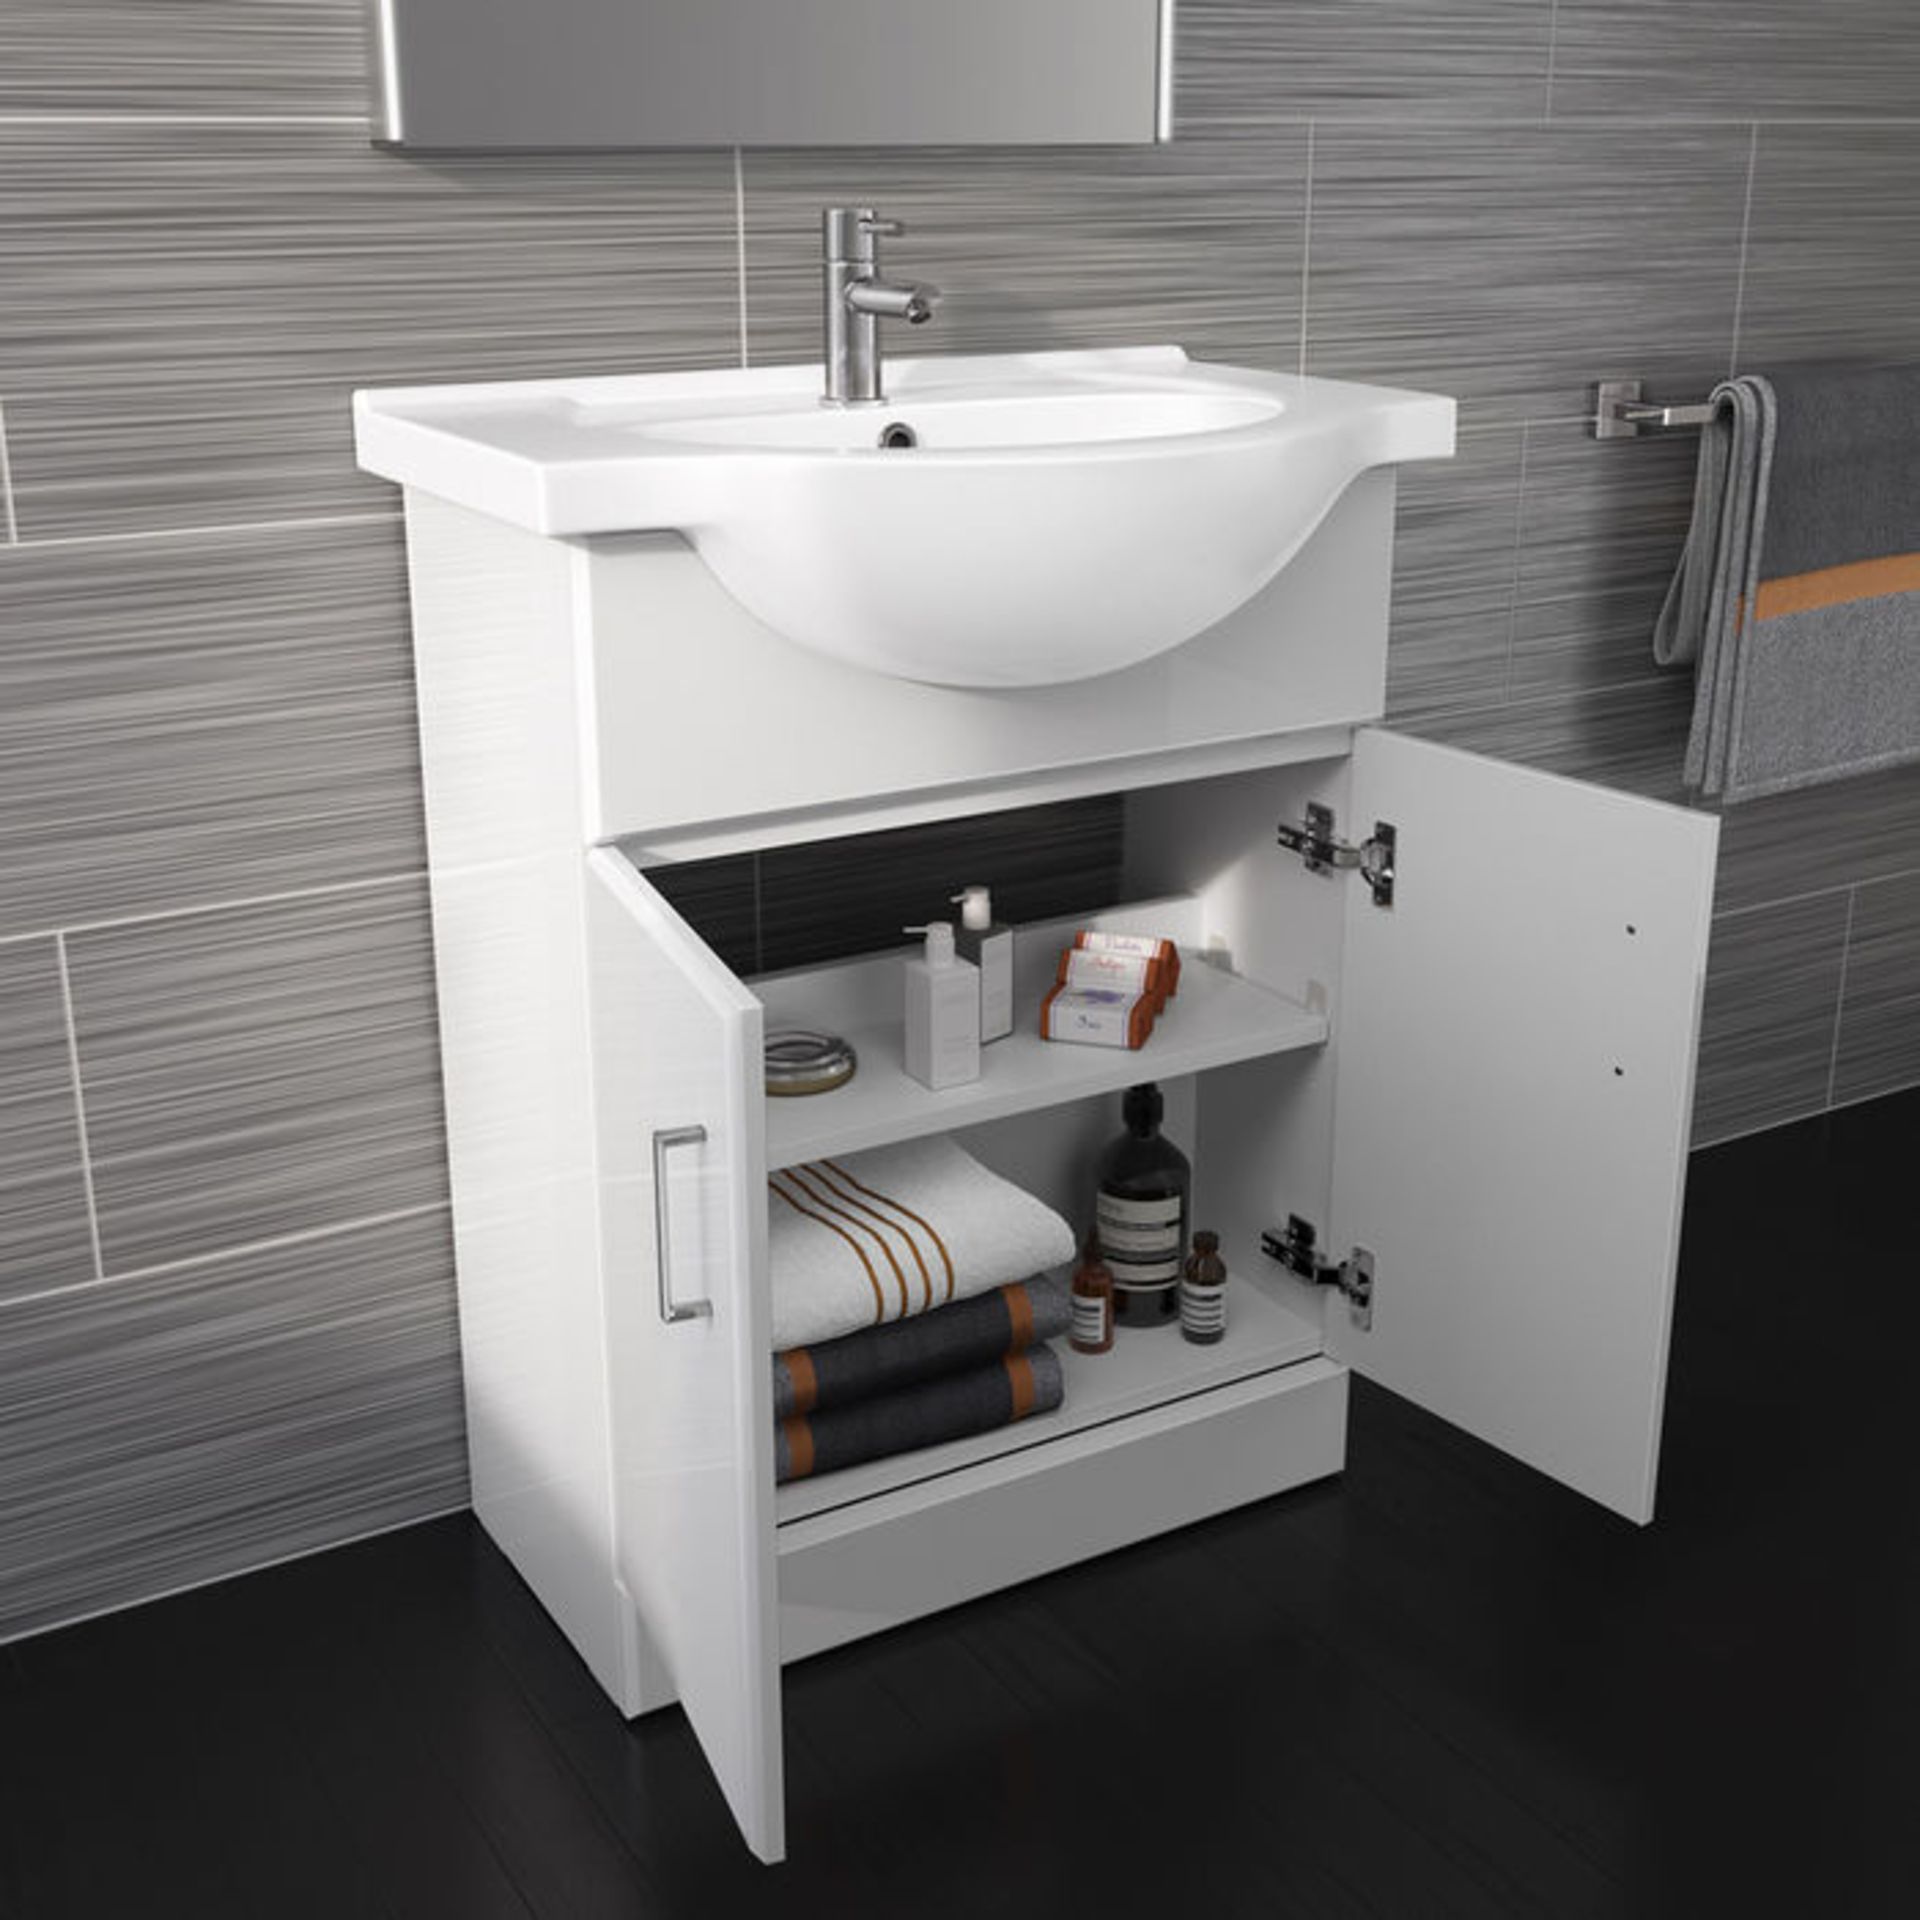 (Q93) 650x435mm Quartz Gloss White Built In Basin Cabinet. RRP £399.99. comes complete with basin. - Image 2 of 5